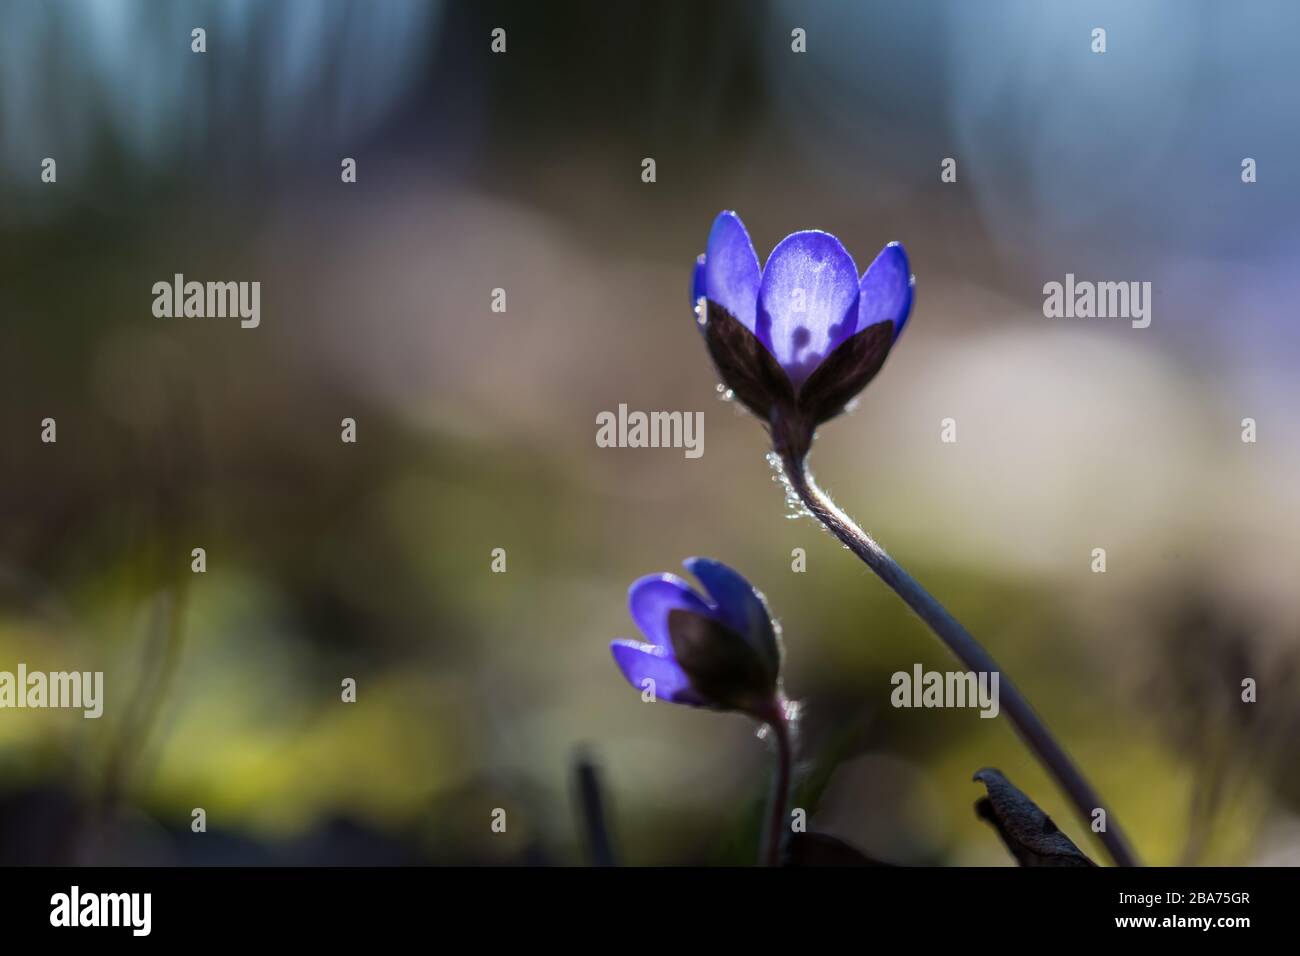 Beautiful Blue Anemones in backlight - early spring sign Stock Photo